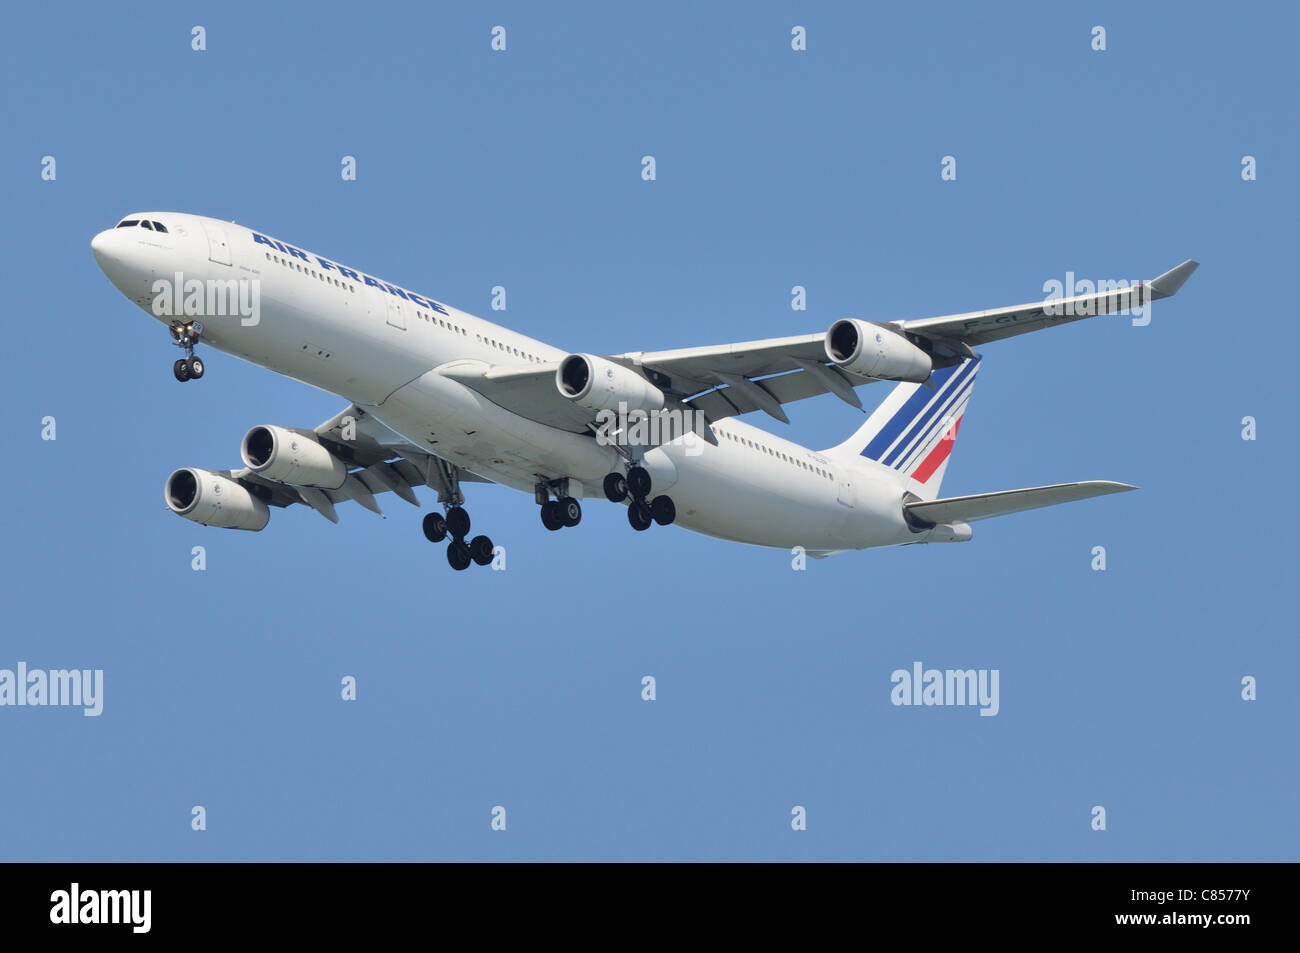 Approche finale Air France Airbus A380 atterrissage. Banque D'Images